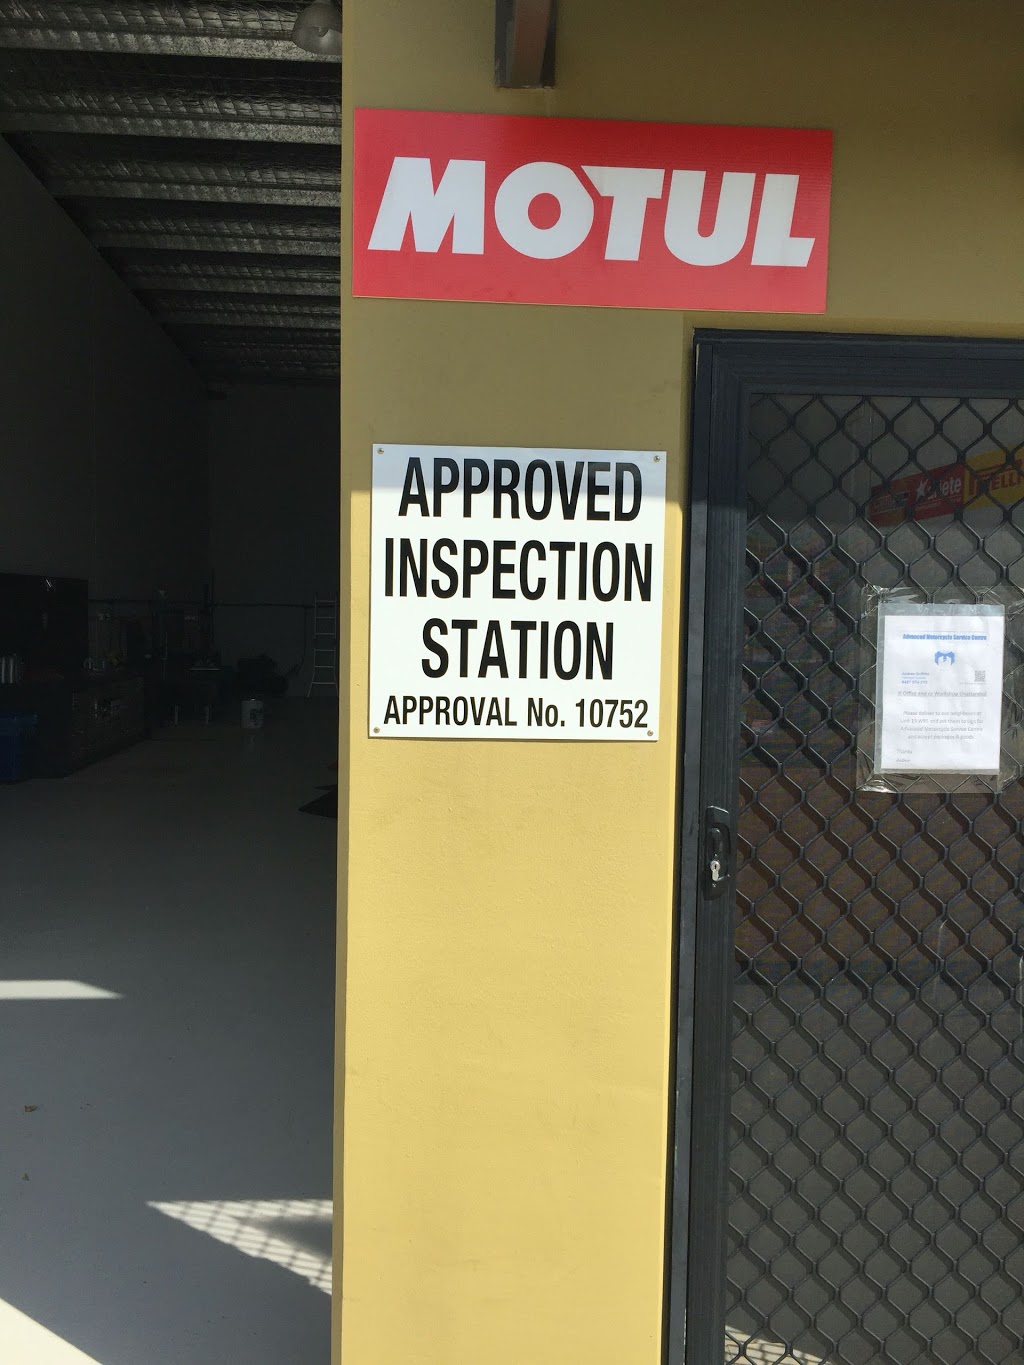 Advanced Motorcycle Service Centre | parking | 114 Oleander Ave, Scarness QLD 4655, Australia | 0427874305 OR +61 427 874 305